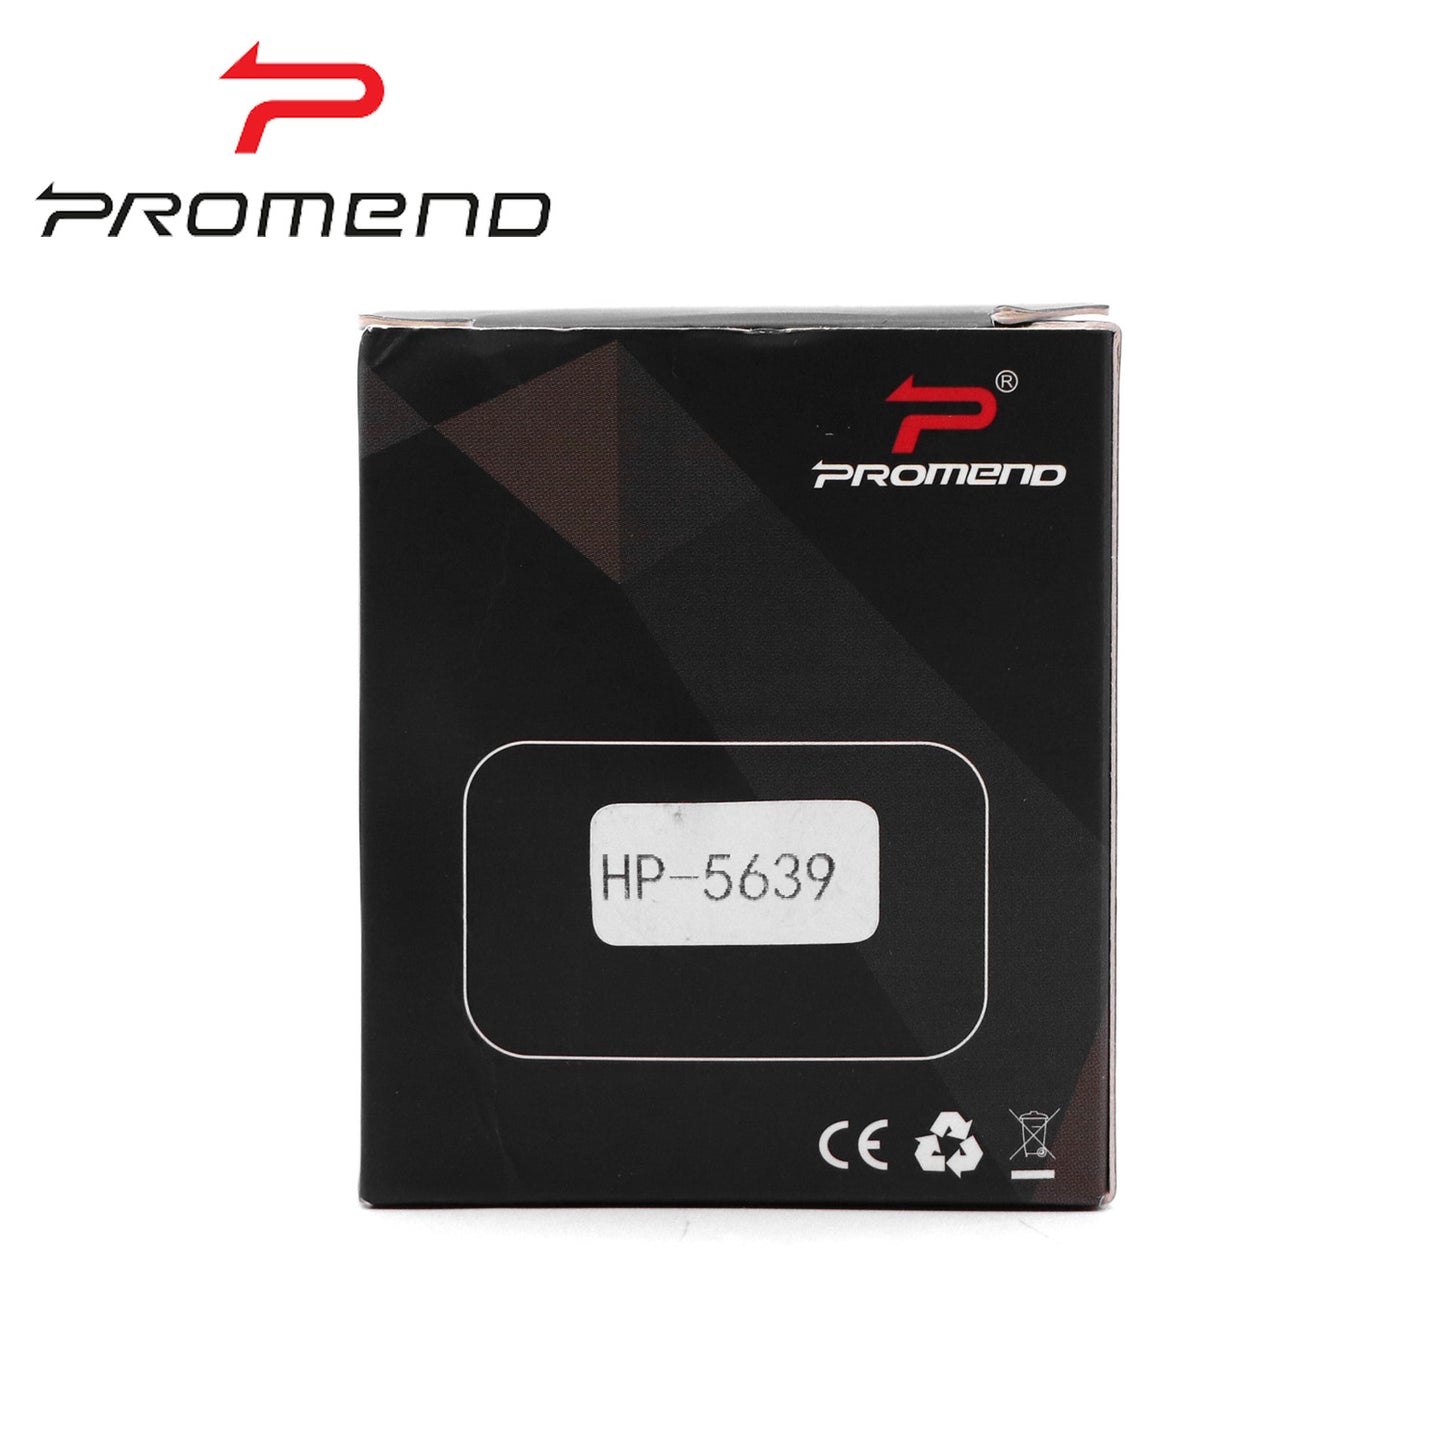 Promend HP-5639 MTB Aluminum Alloy Conical Bearing Bicycle Headset